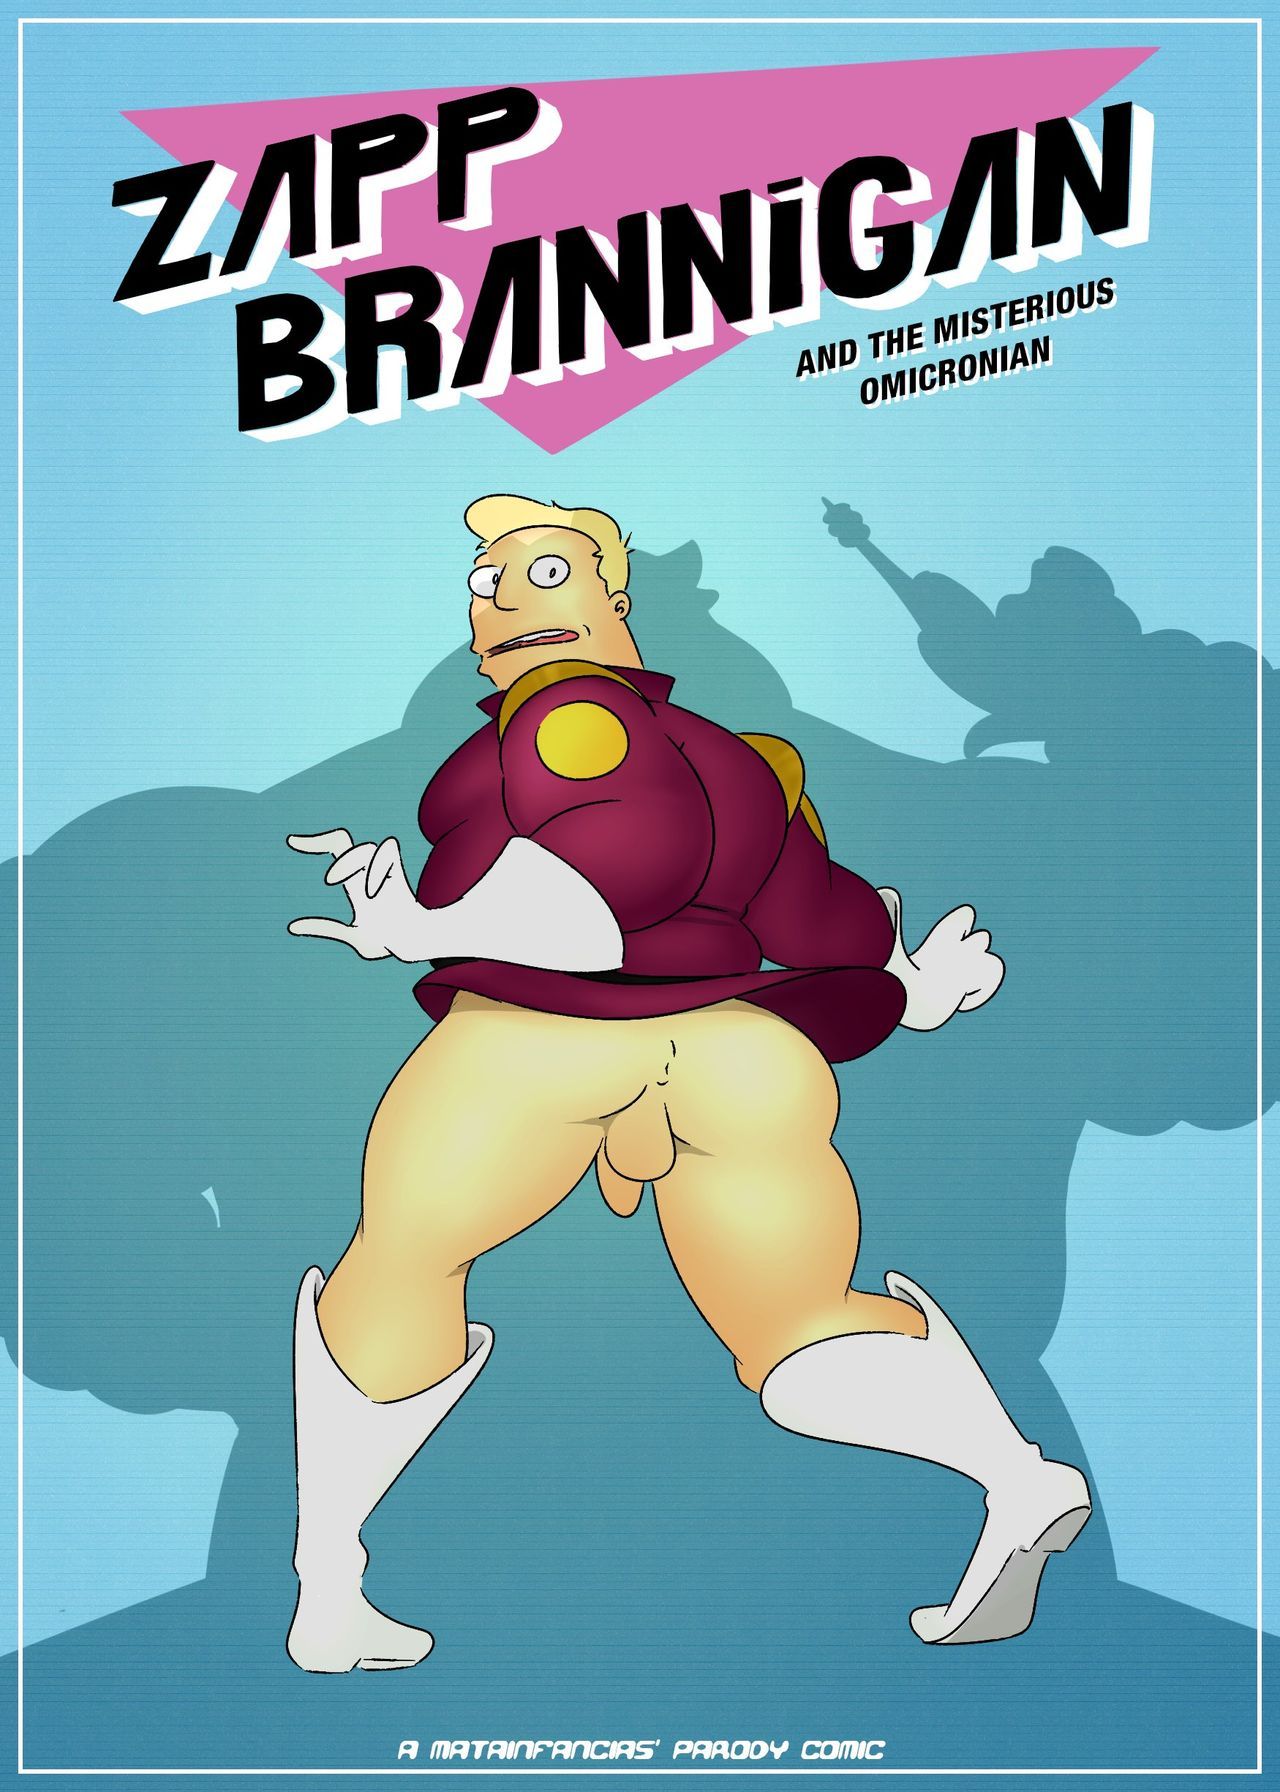 ZAPP BRANNIGAN & THE MISTERIOUS OMICRONIAN 1